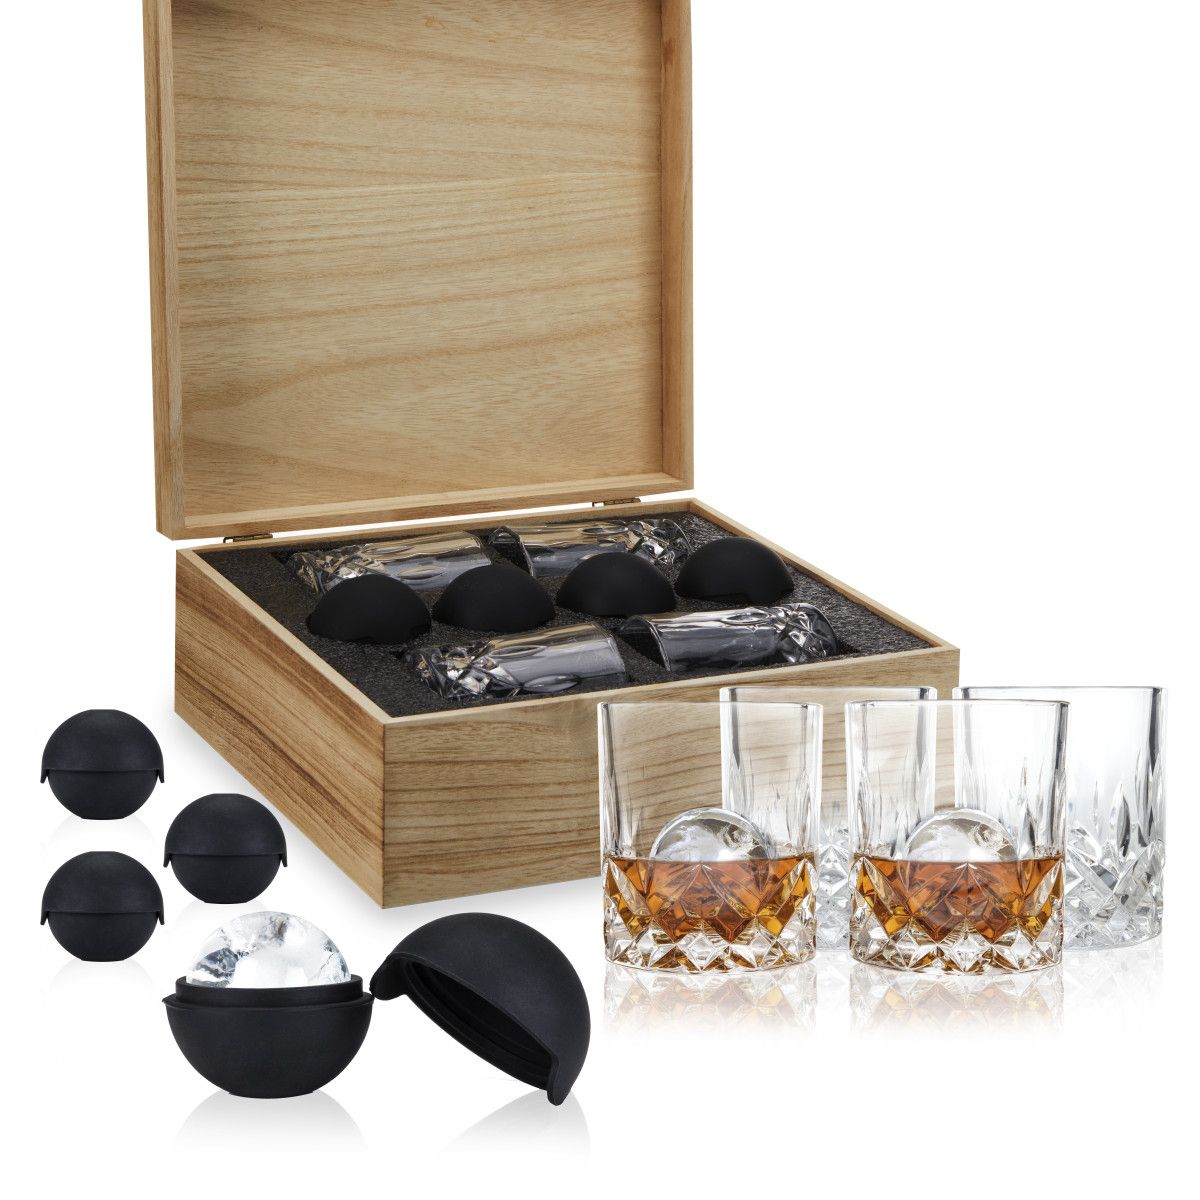 ZWIESEL GLAS Whiskey Ice Mold Gift Set